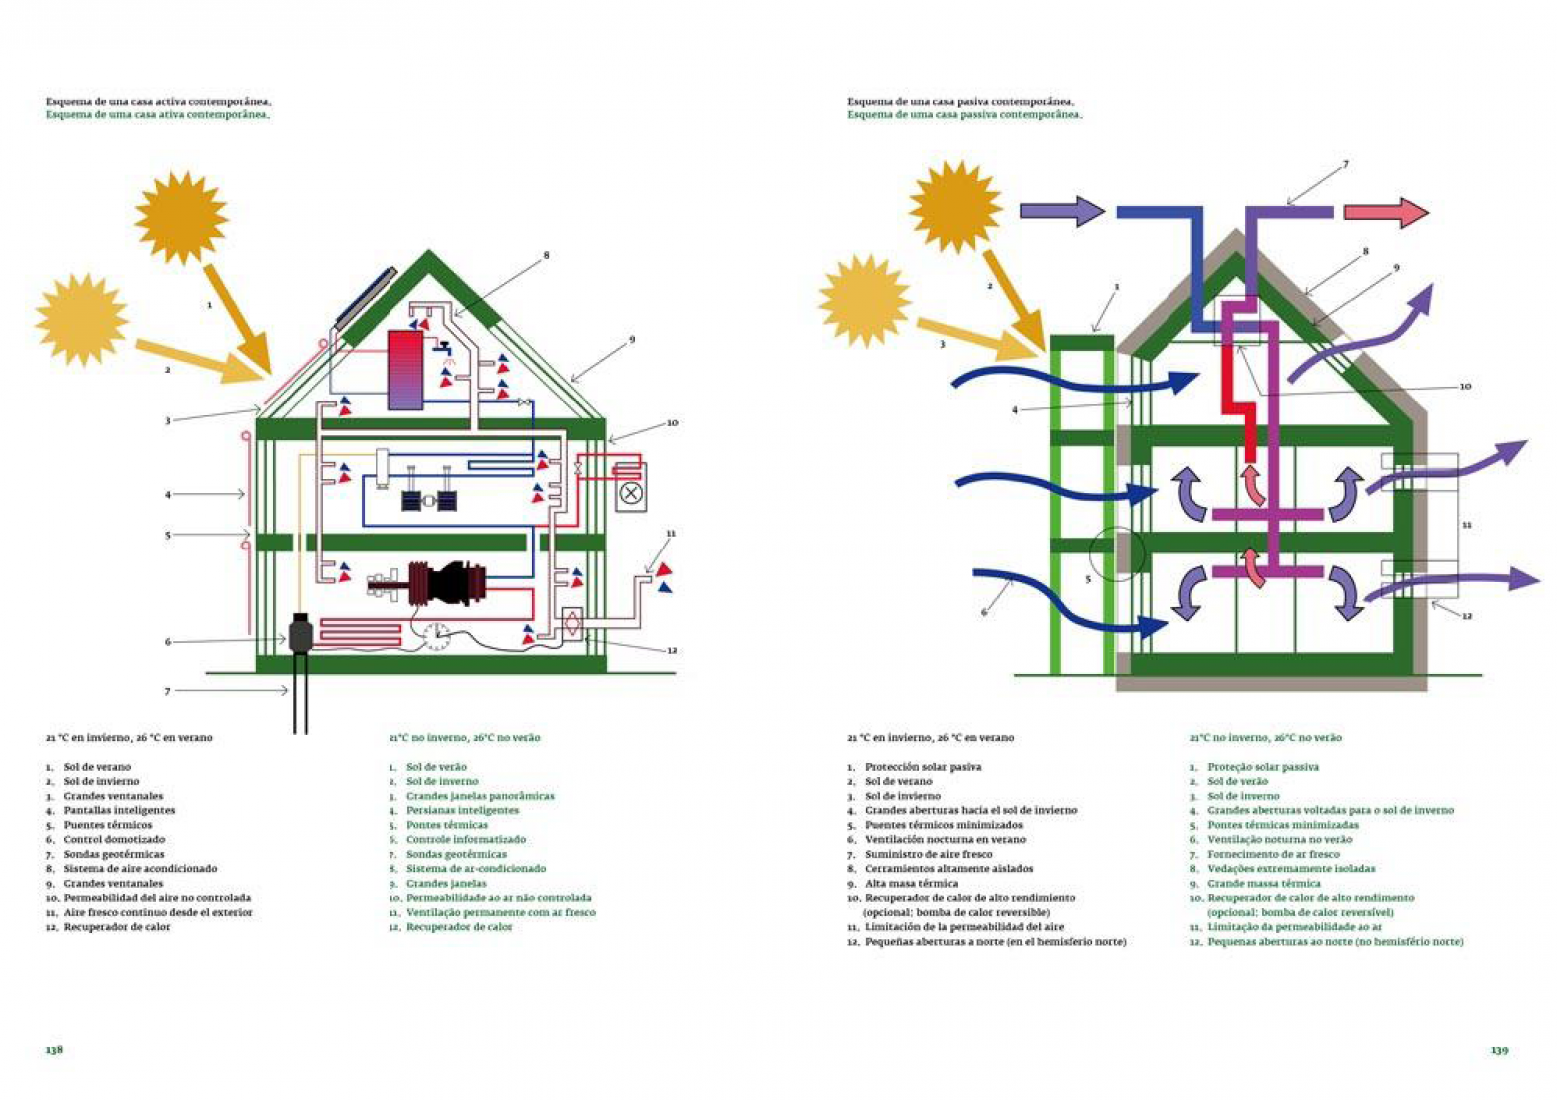  From the passive house to Passivhaus standards. Passive Architecture in warm climates.  Micheel Wassoulf. Ed.Gustavo Gili.